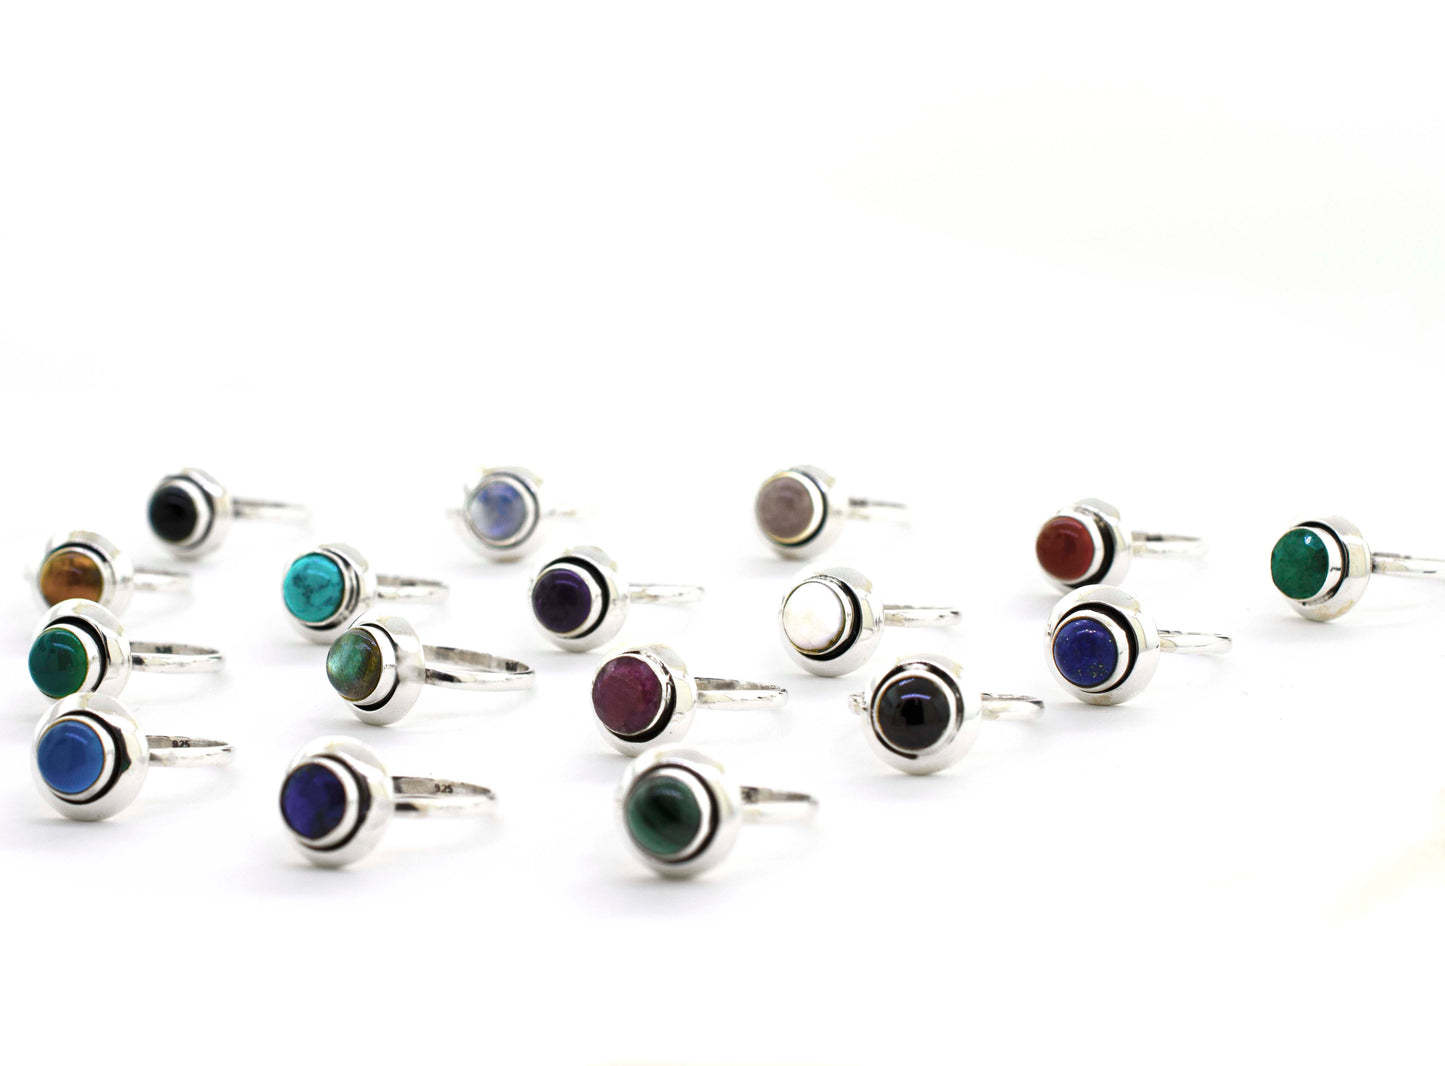 A Round Gemstone Ring With Oxidized Outline featuring cabochon stones in various vibrant colors.